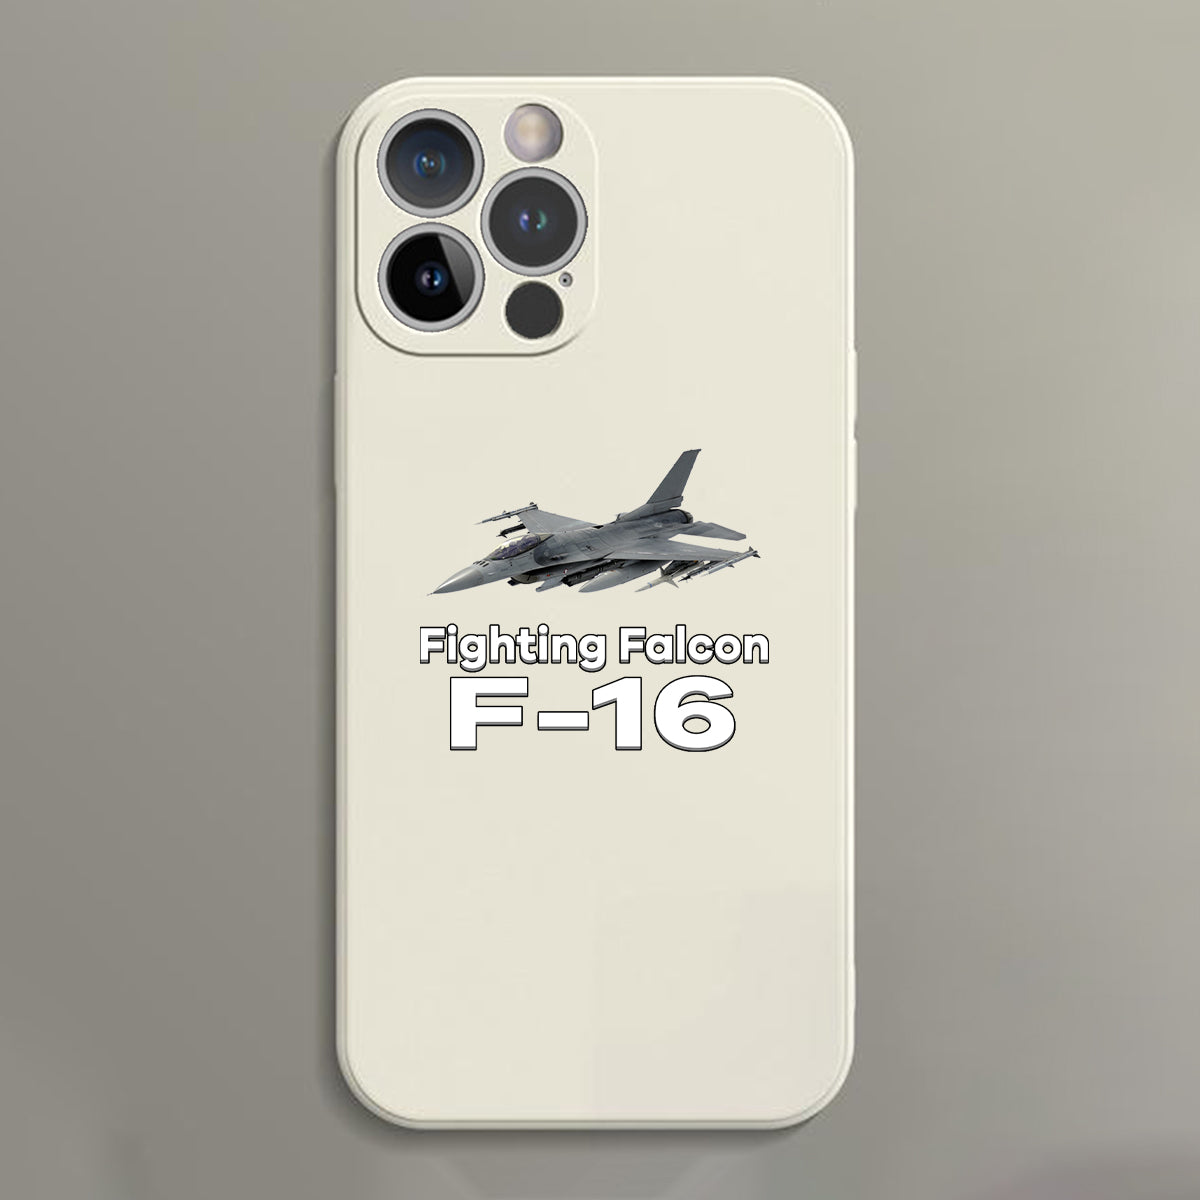 The Fighting Falcon F16 Designed Soft Silicone iPhone Cases